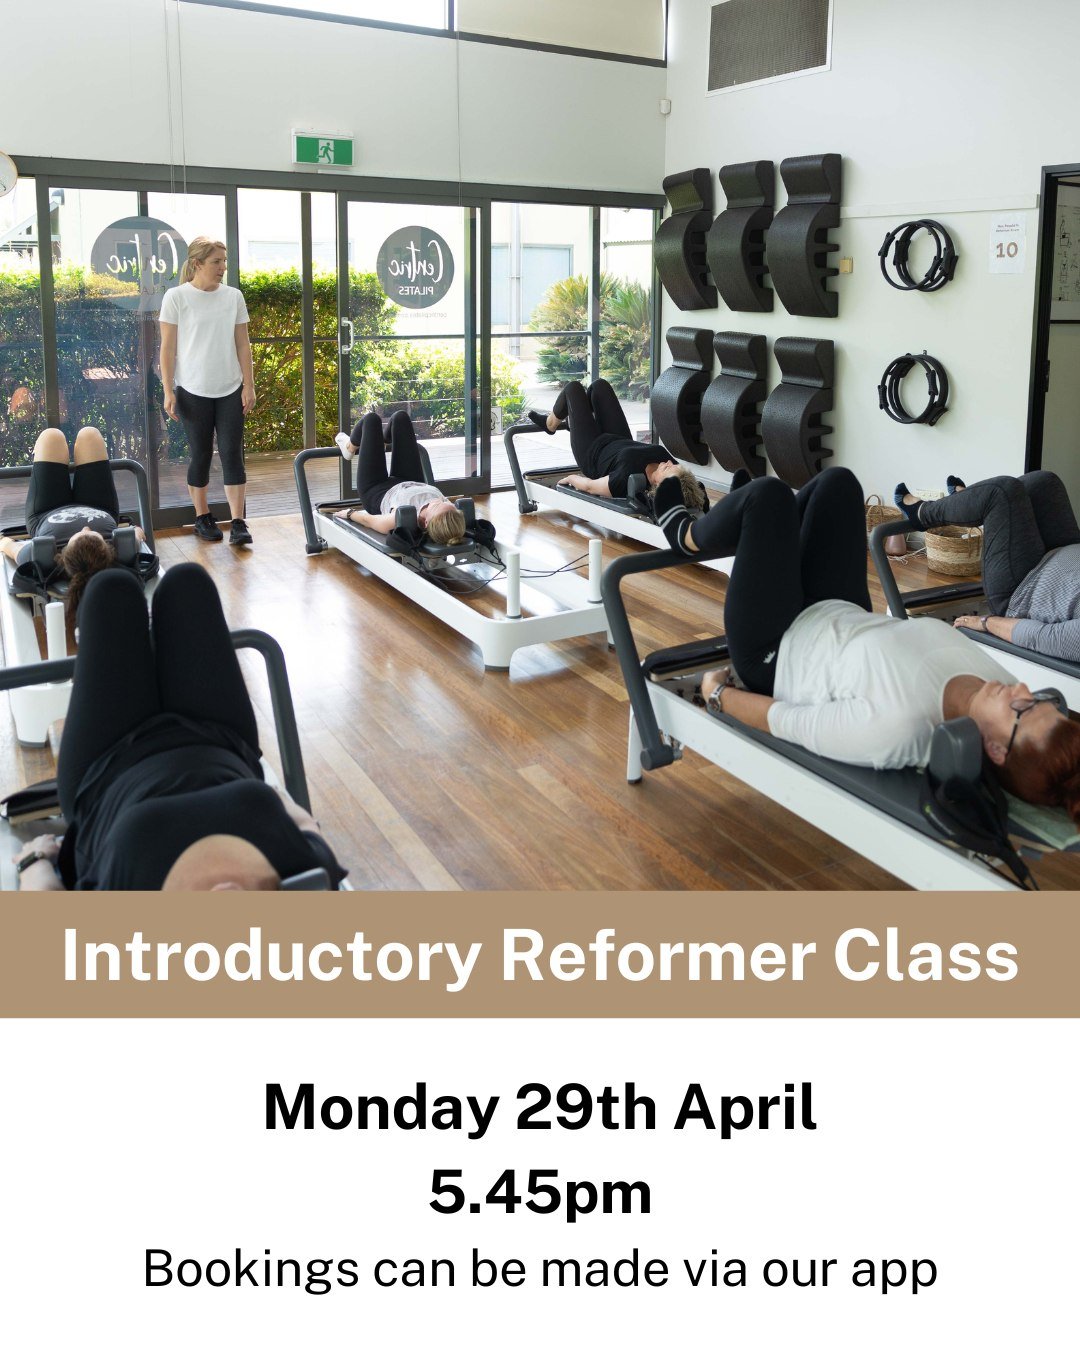 If you are interested in starting reformer classes however unable to make an intro session during the day, we have an evening introductory class available. Maximum of 6 people in the class, our instructor will explain the Pilates method and show you 